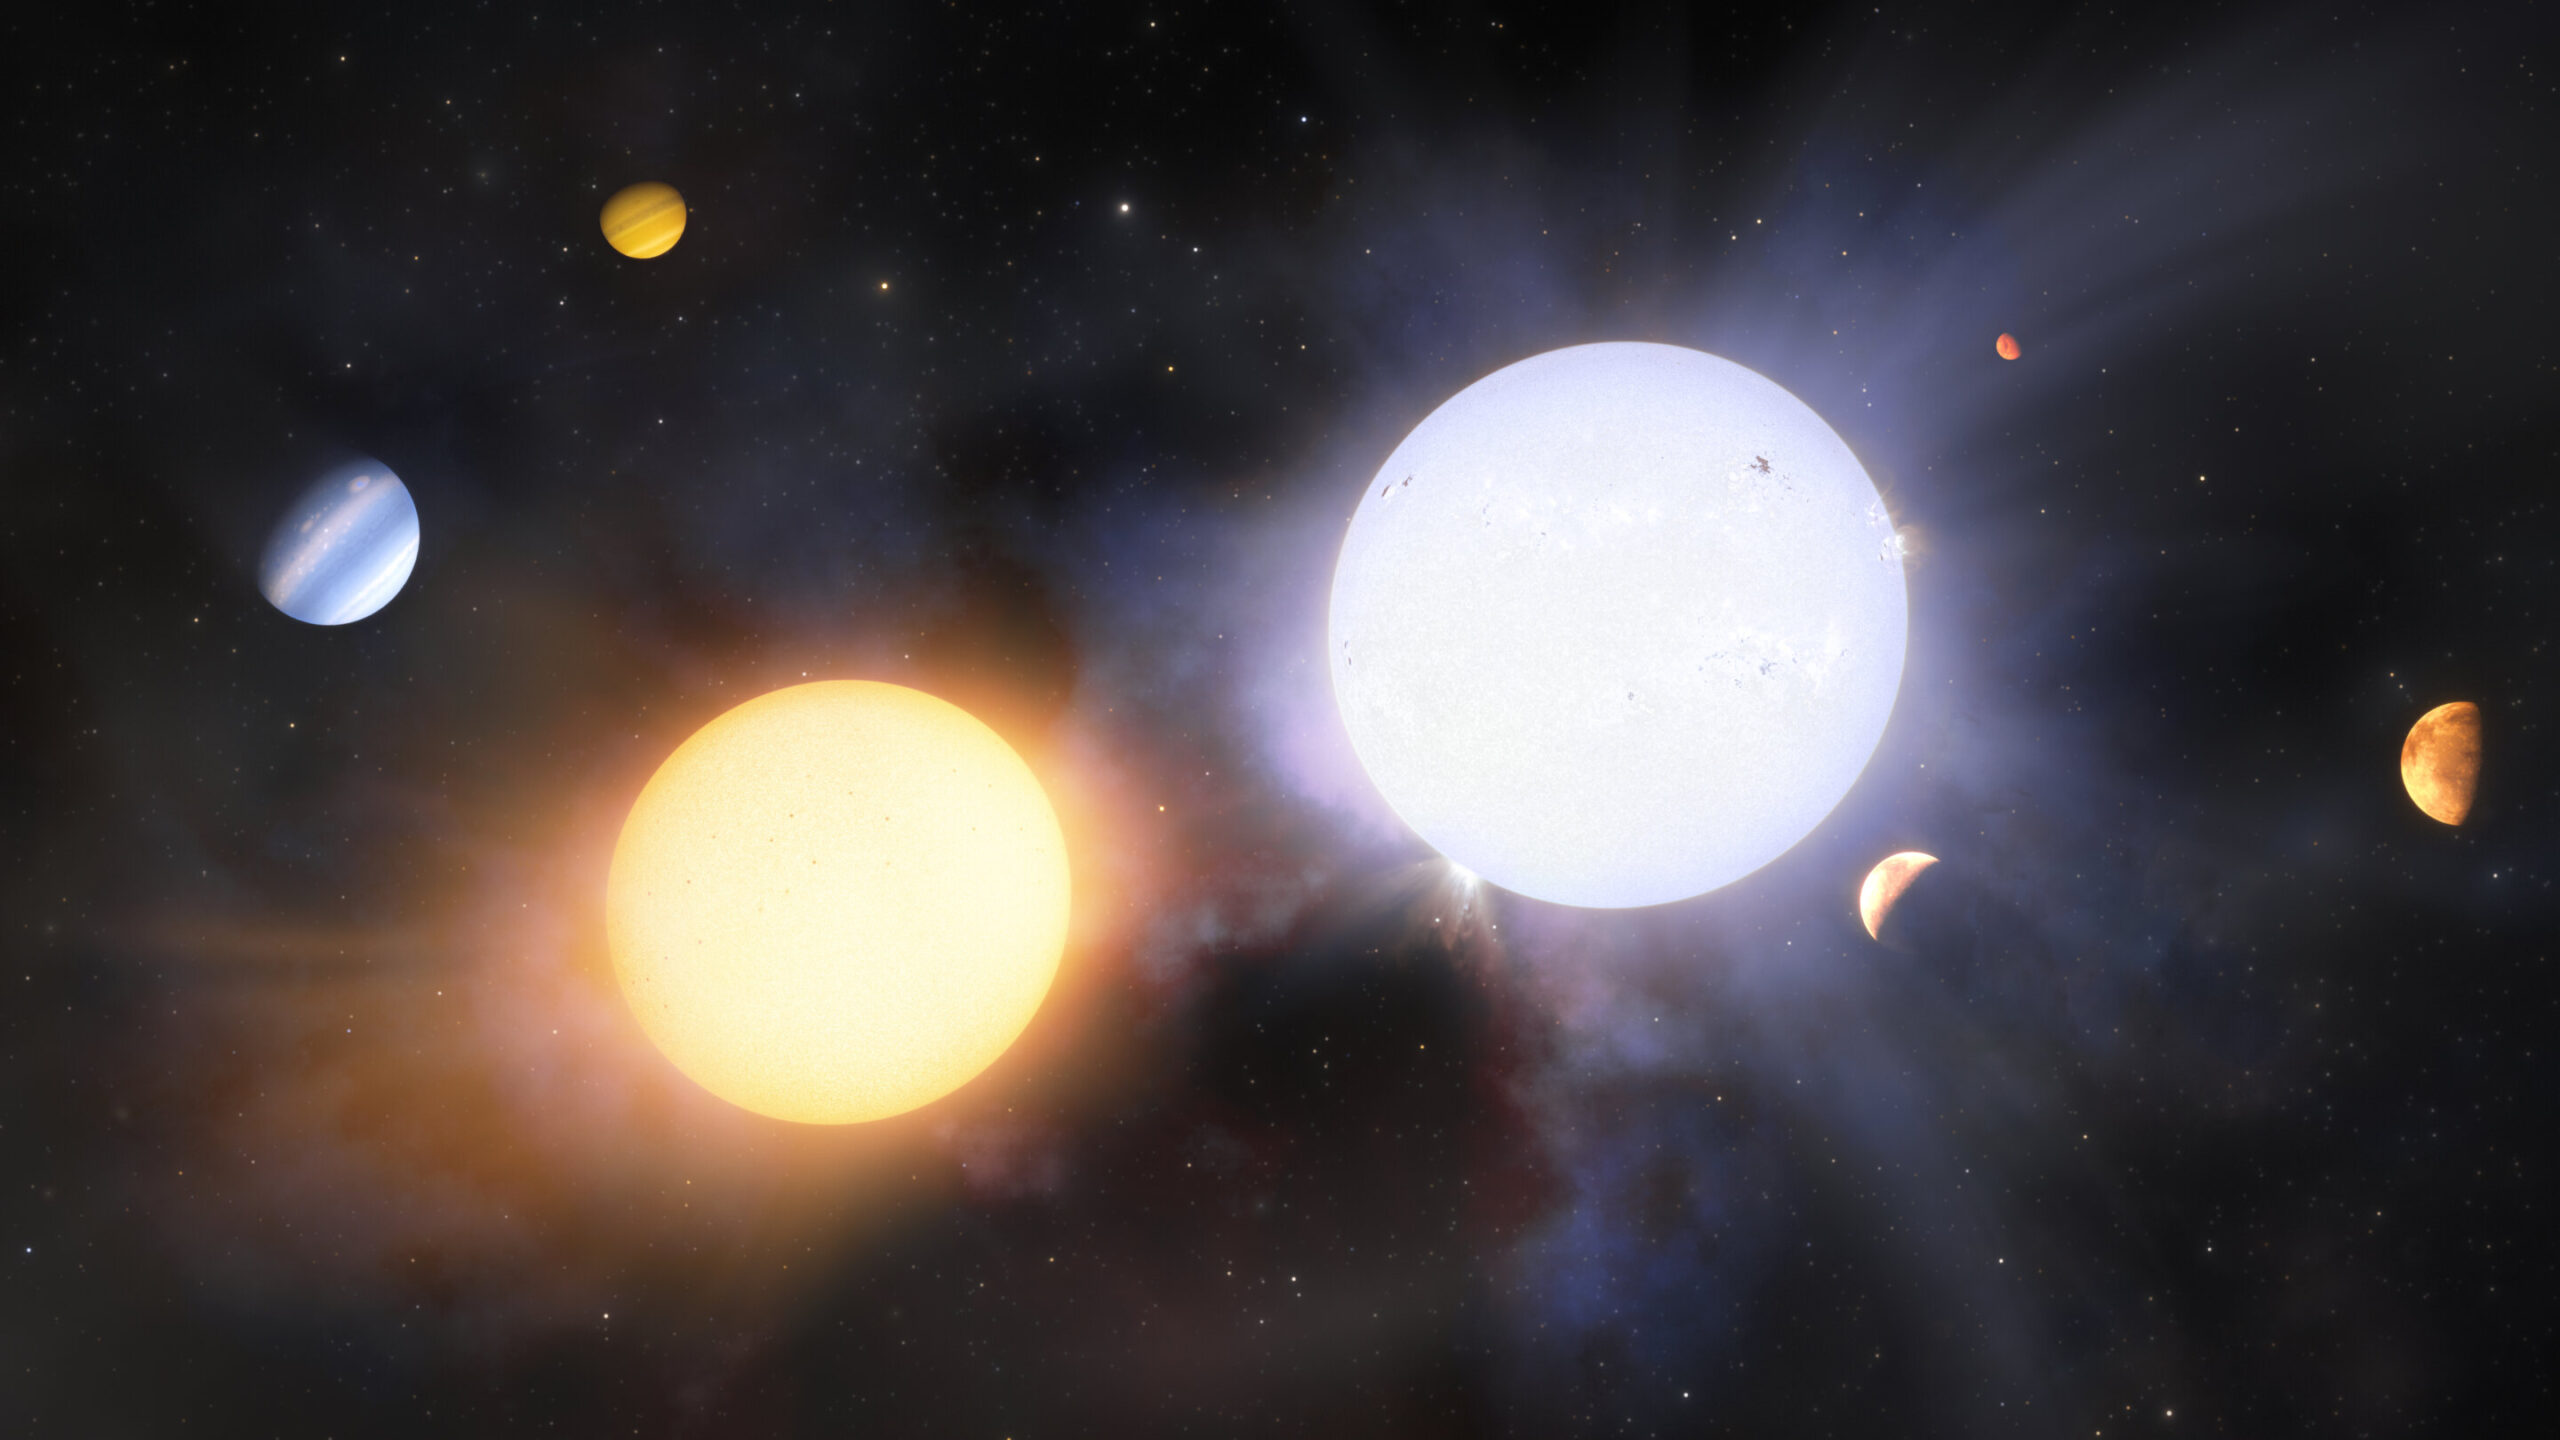 Why are binary stars so different?